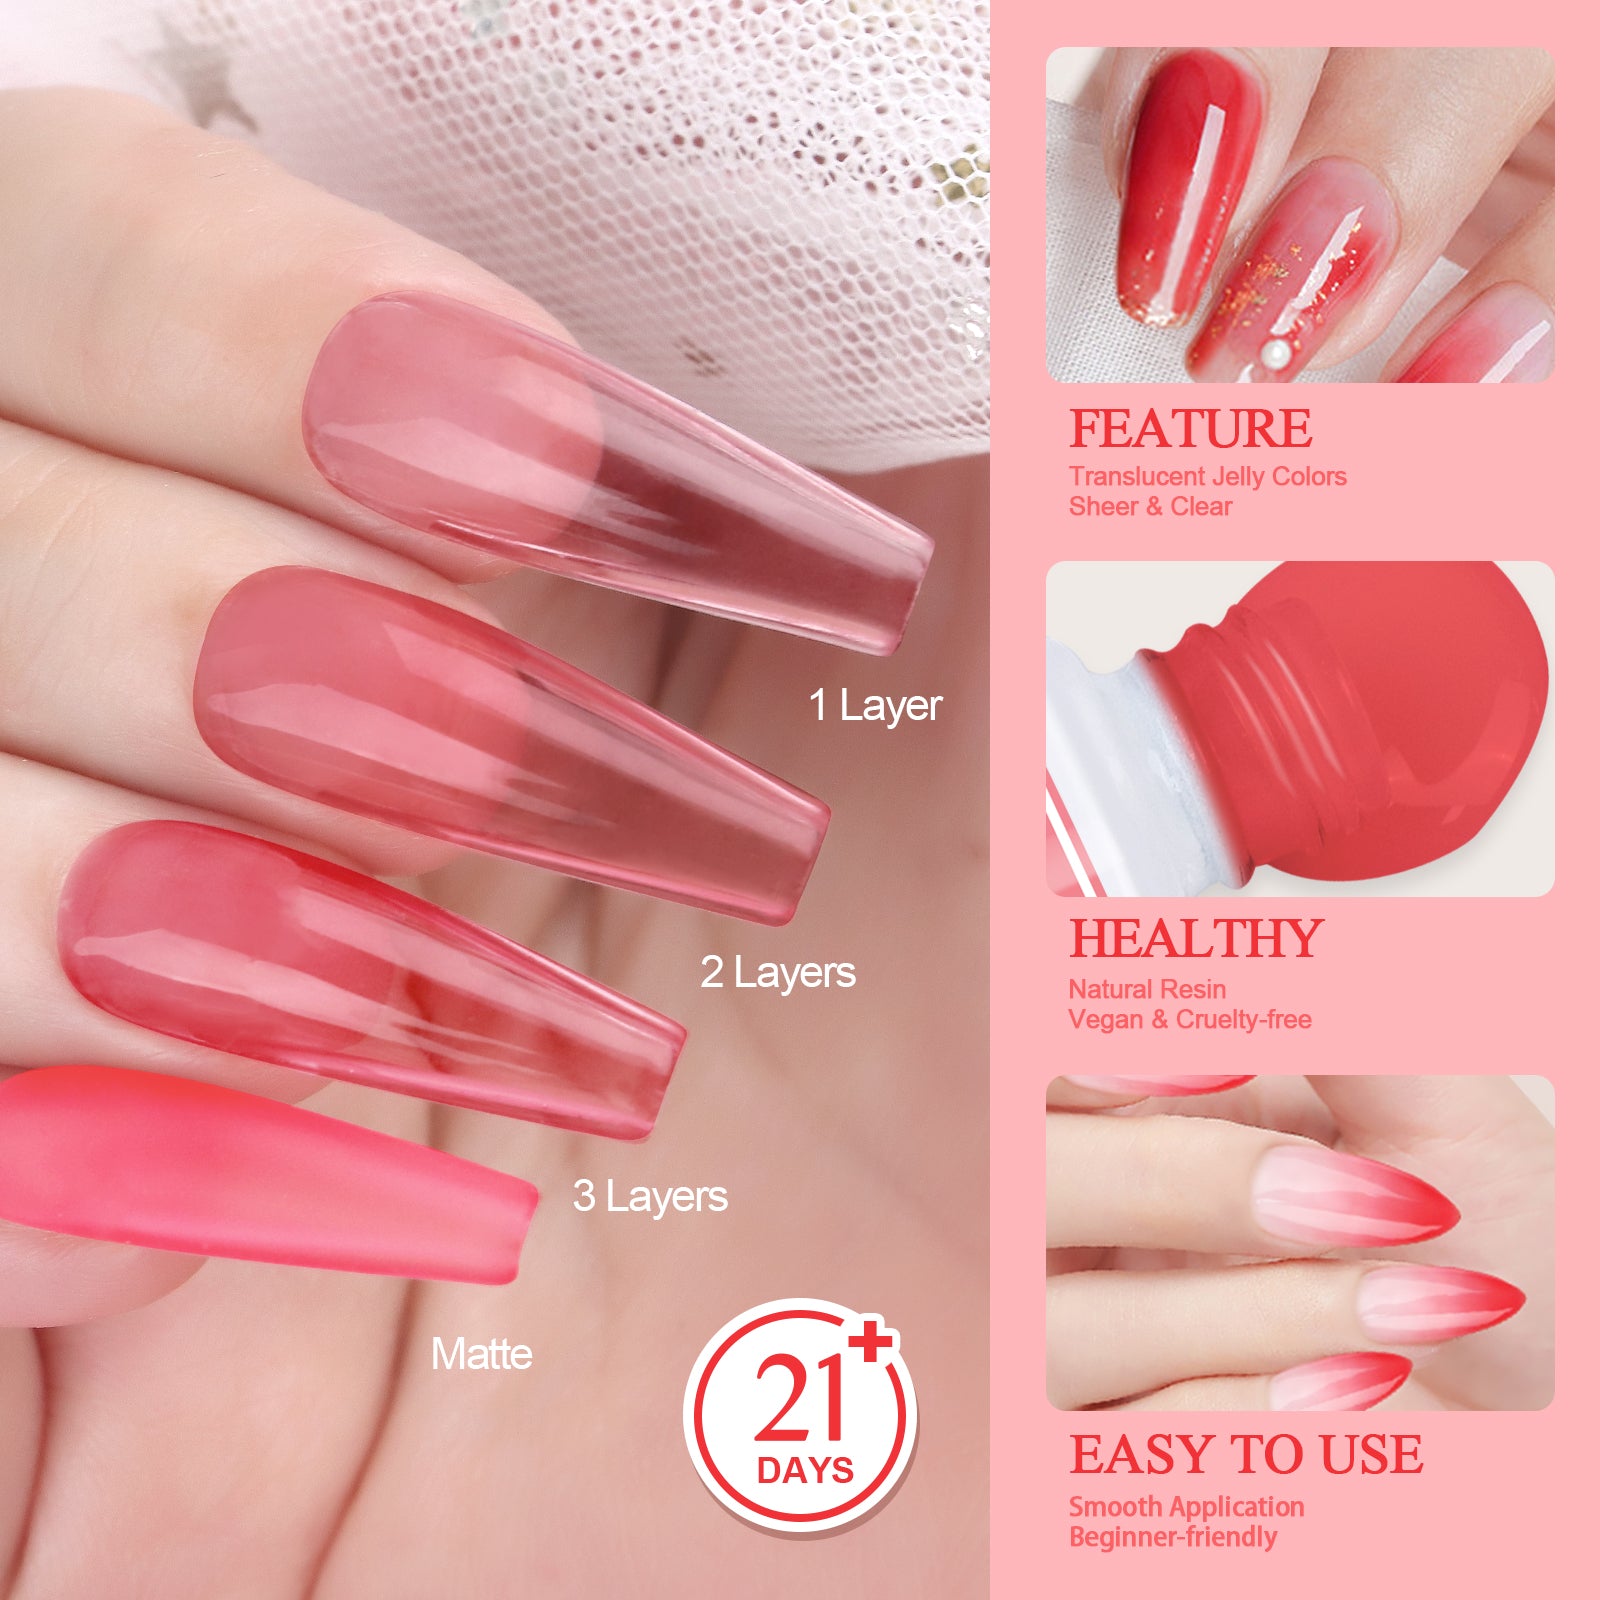 [US ONLY]Transparent Rosy Red Jelly Gel Nail Polish